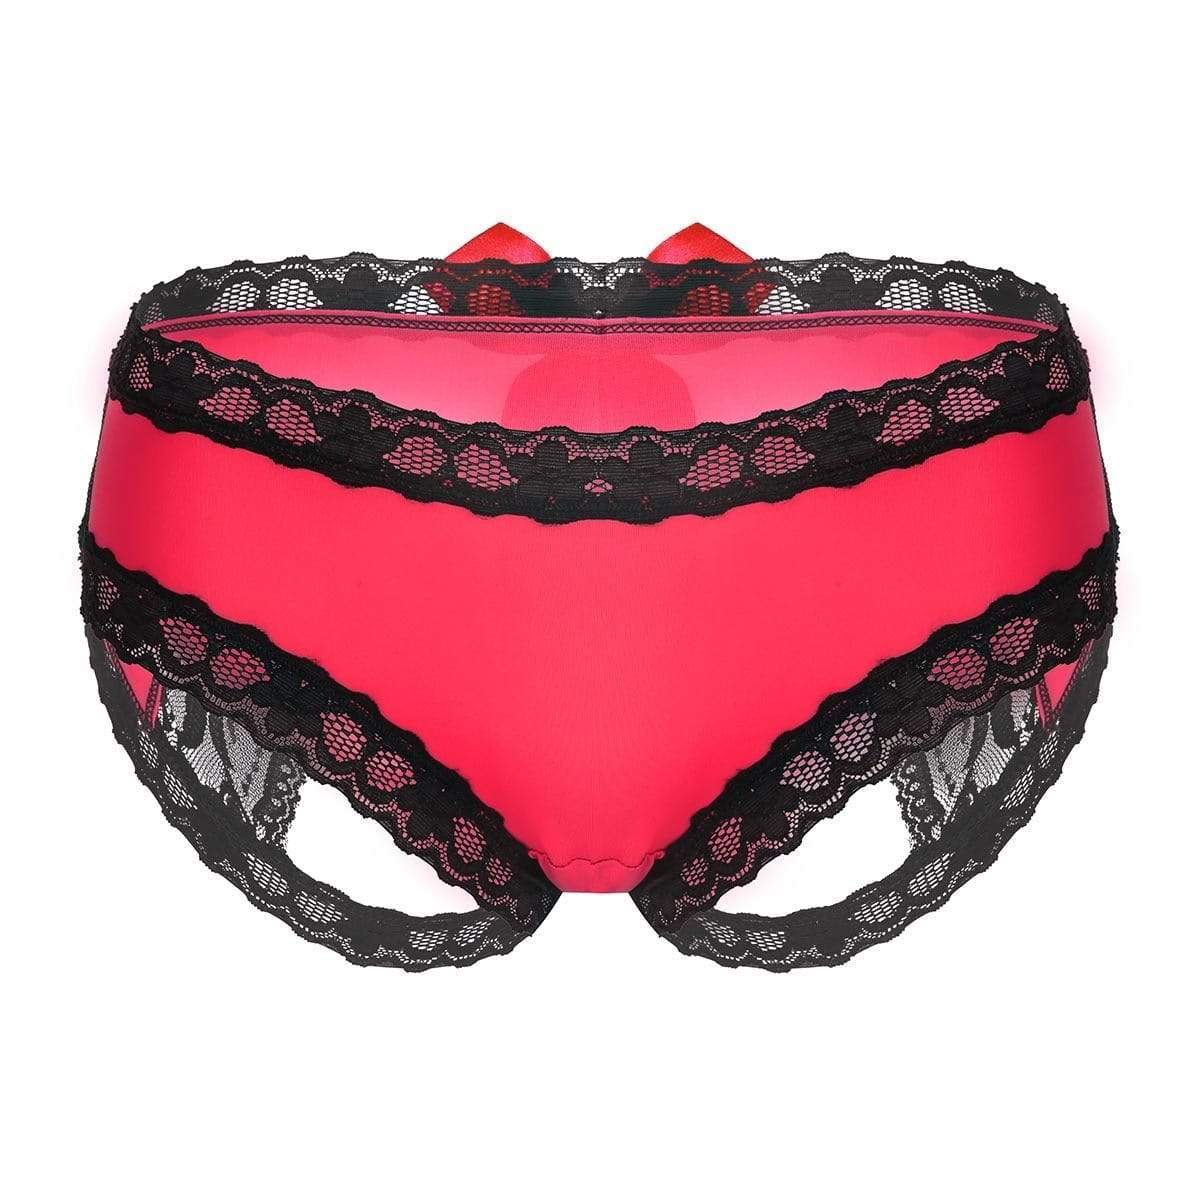 Kinky Cloth Panties Red / One Size Open Bottom Bowknot Panties